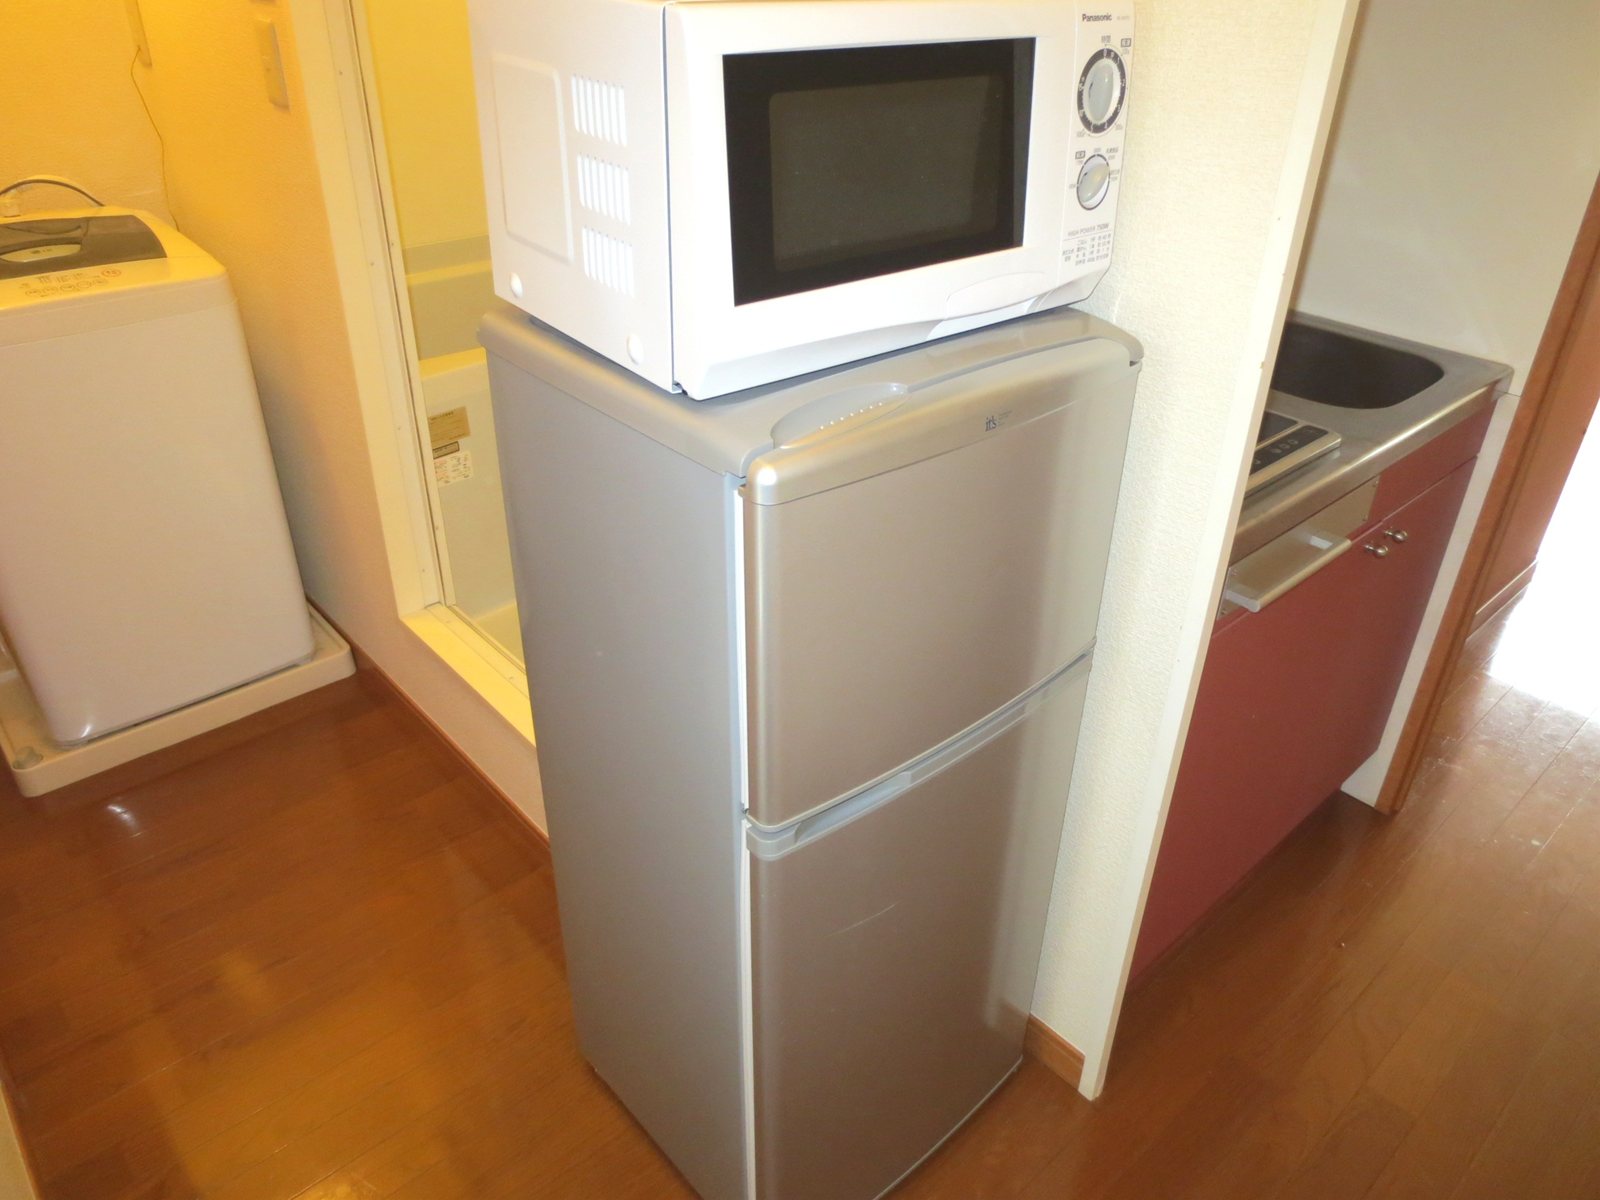 Other Equipment. refrigerator ・ microwave ・ With washing machine ※ It depends on specification by the room